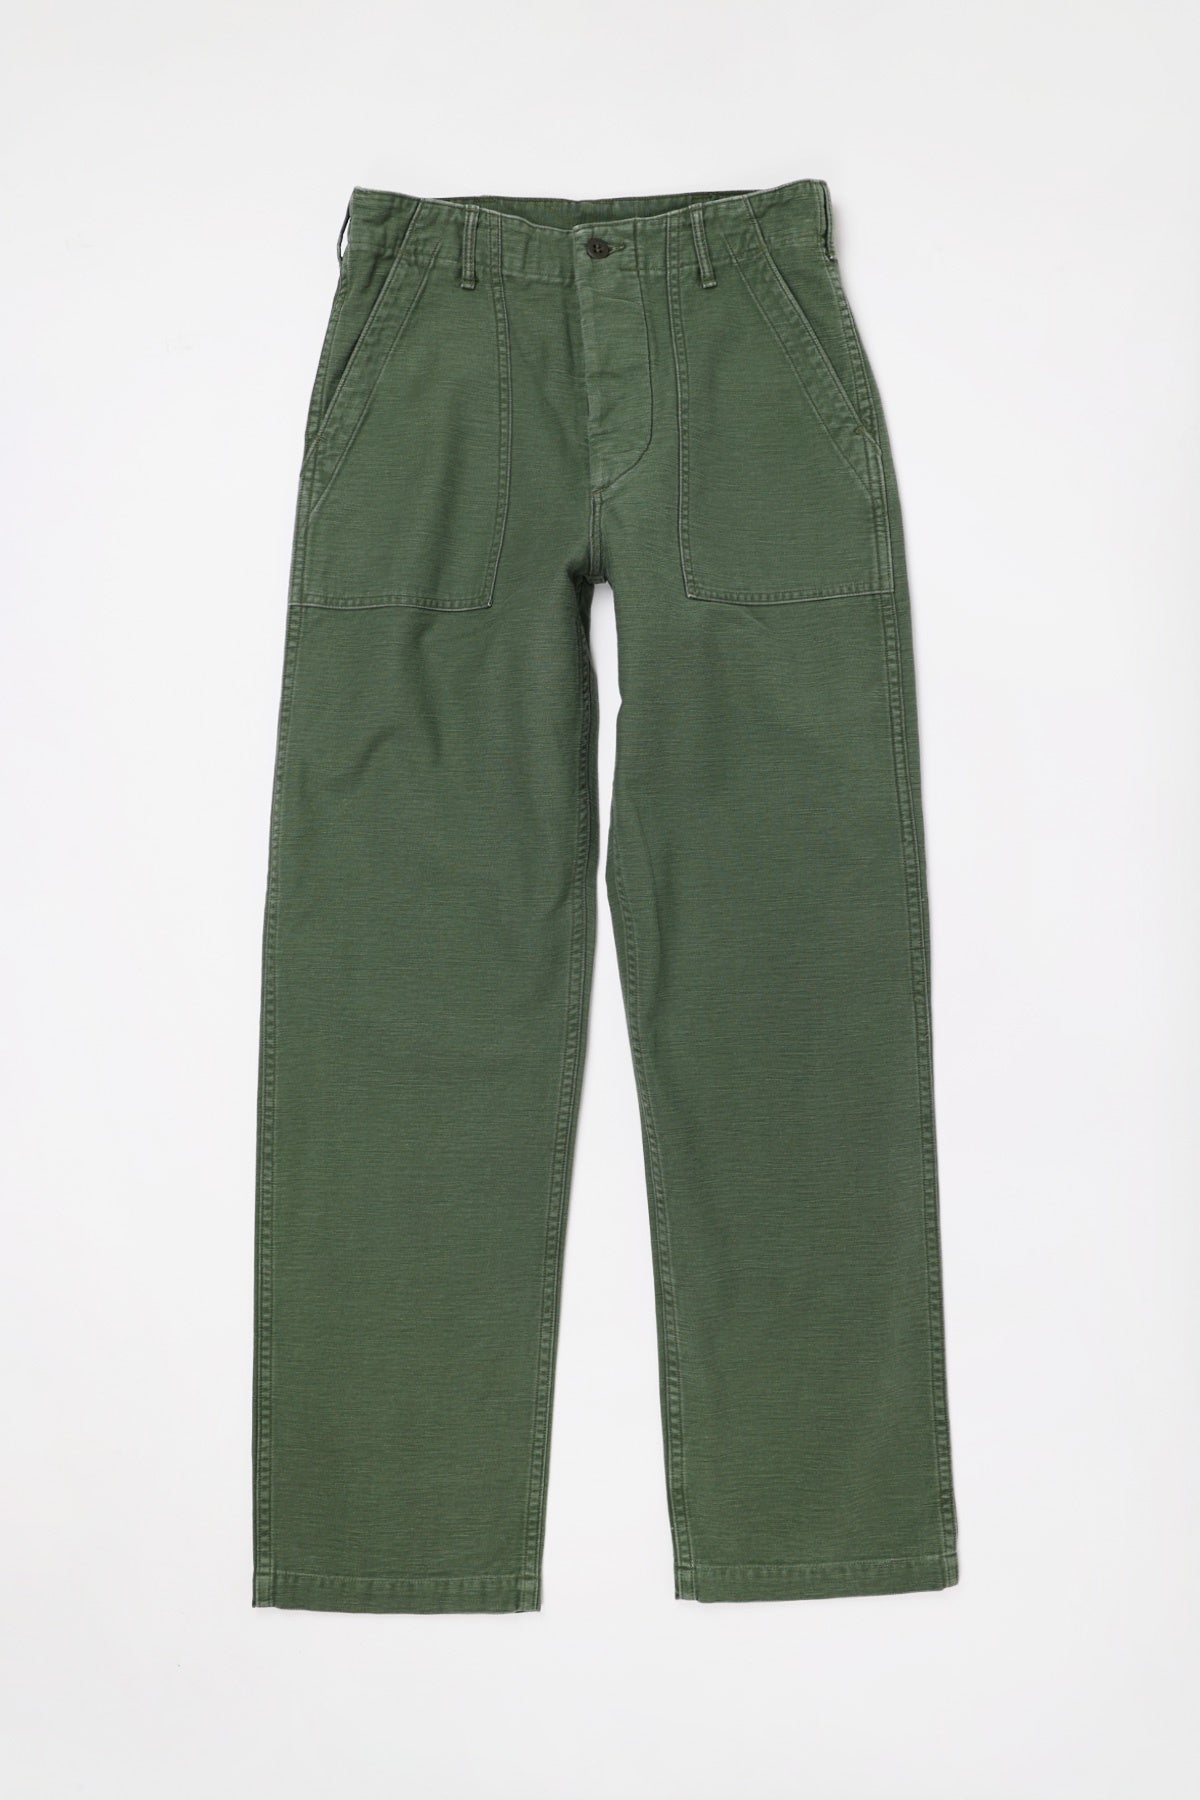 orSlow US Army Fatigue Pants Used Wash (Regular Fit)